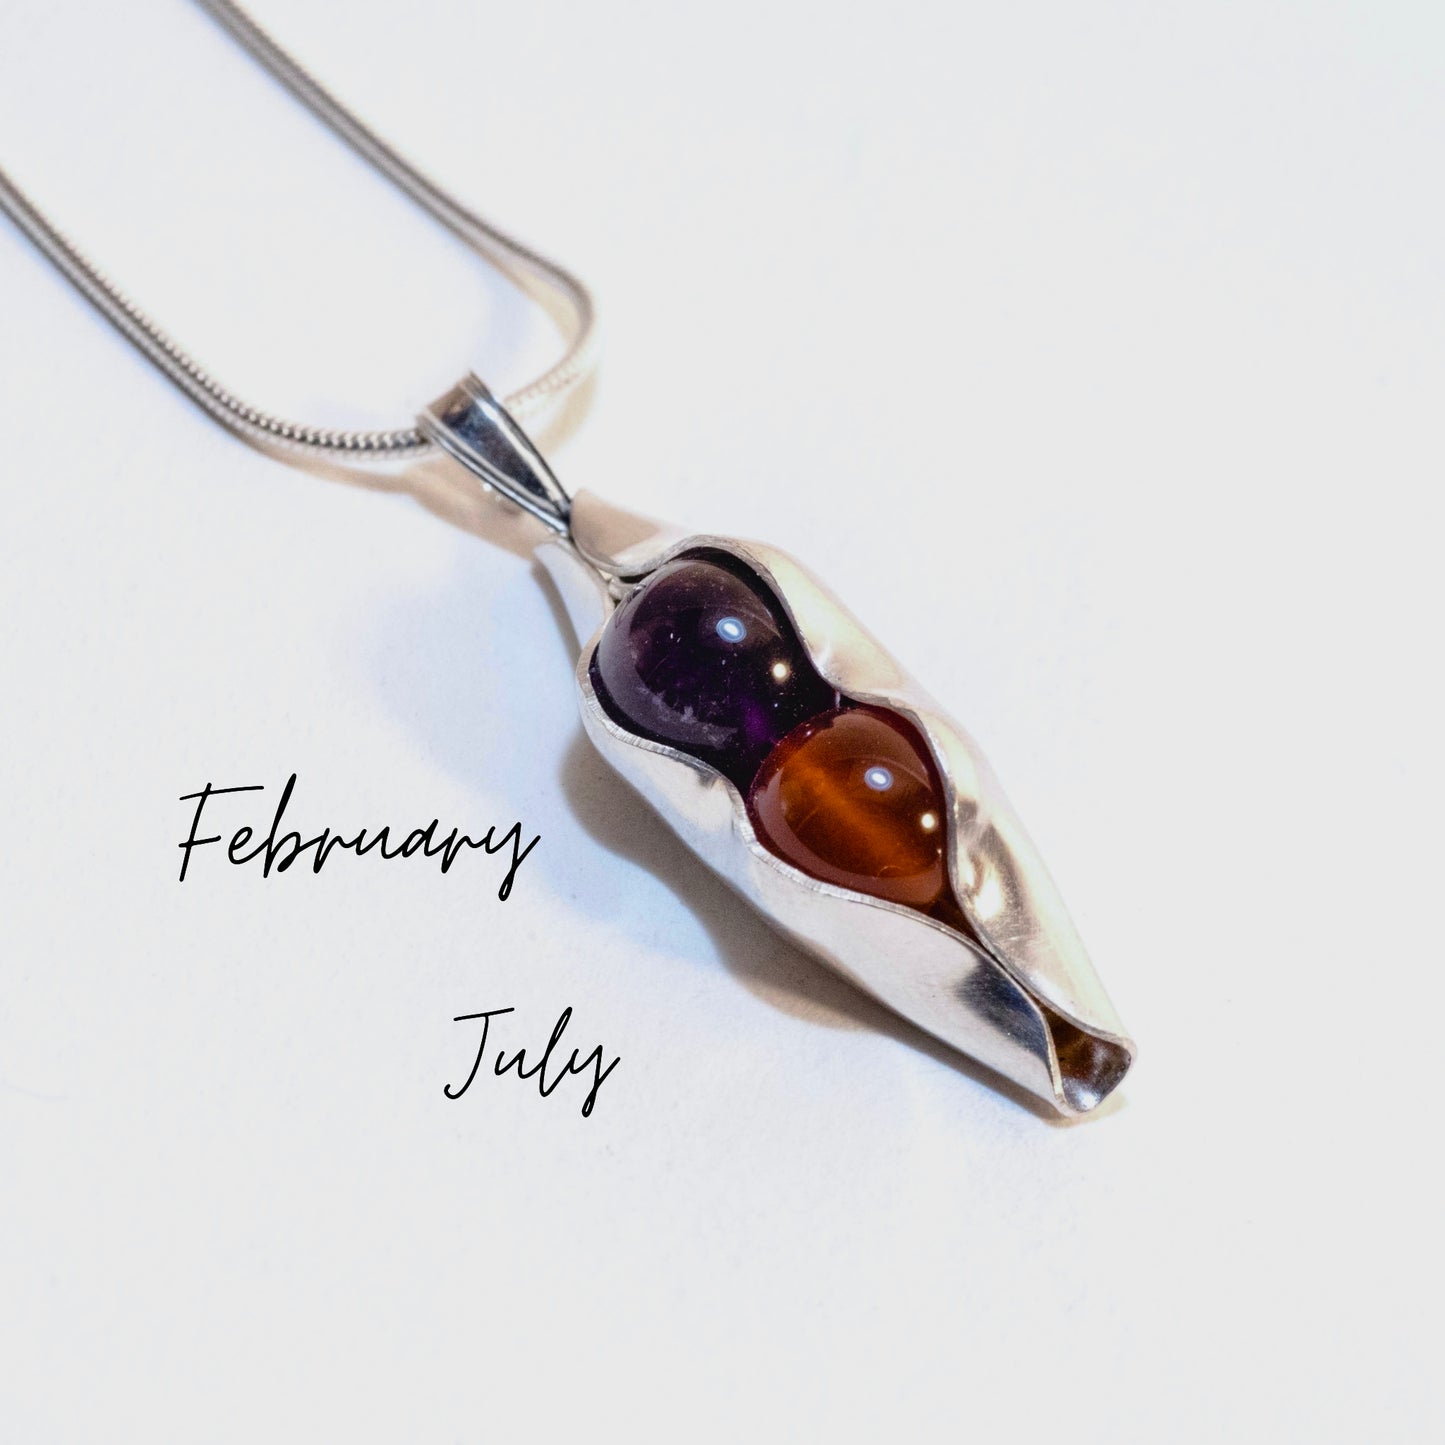 9th anniversary necklace | 9th Anniversary | married for 9years | Pottery anniversary | 9 years together | Sentimental wife gift | Two peas in a pod